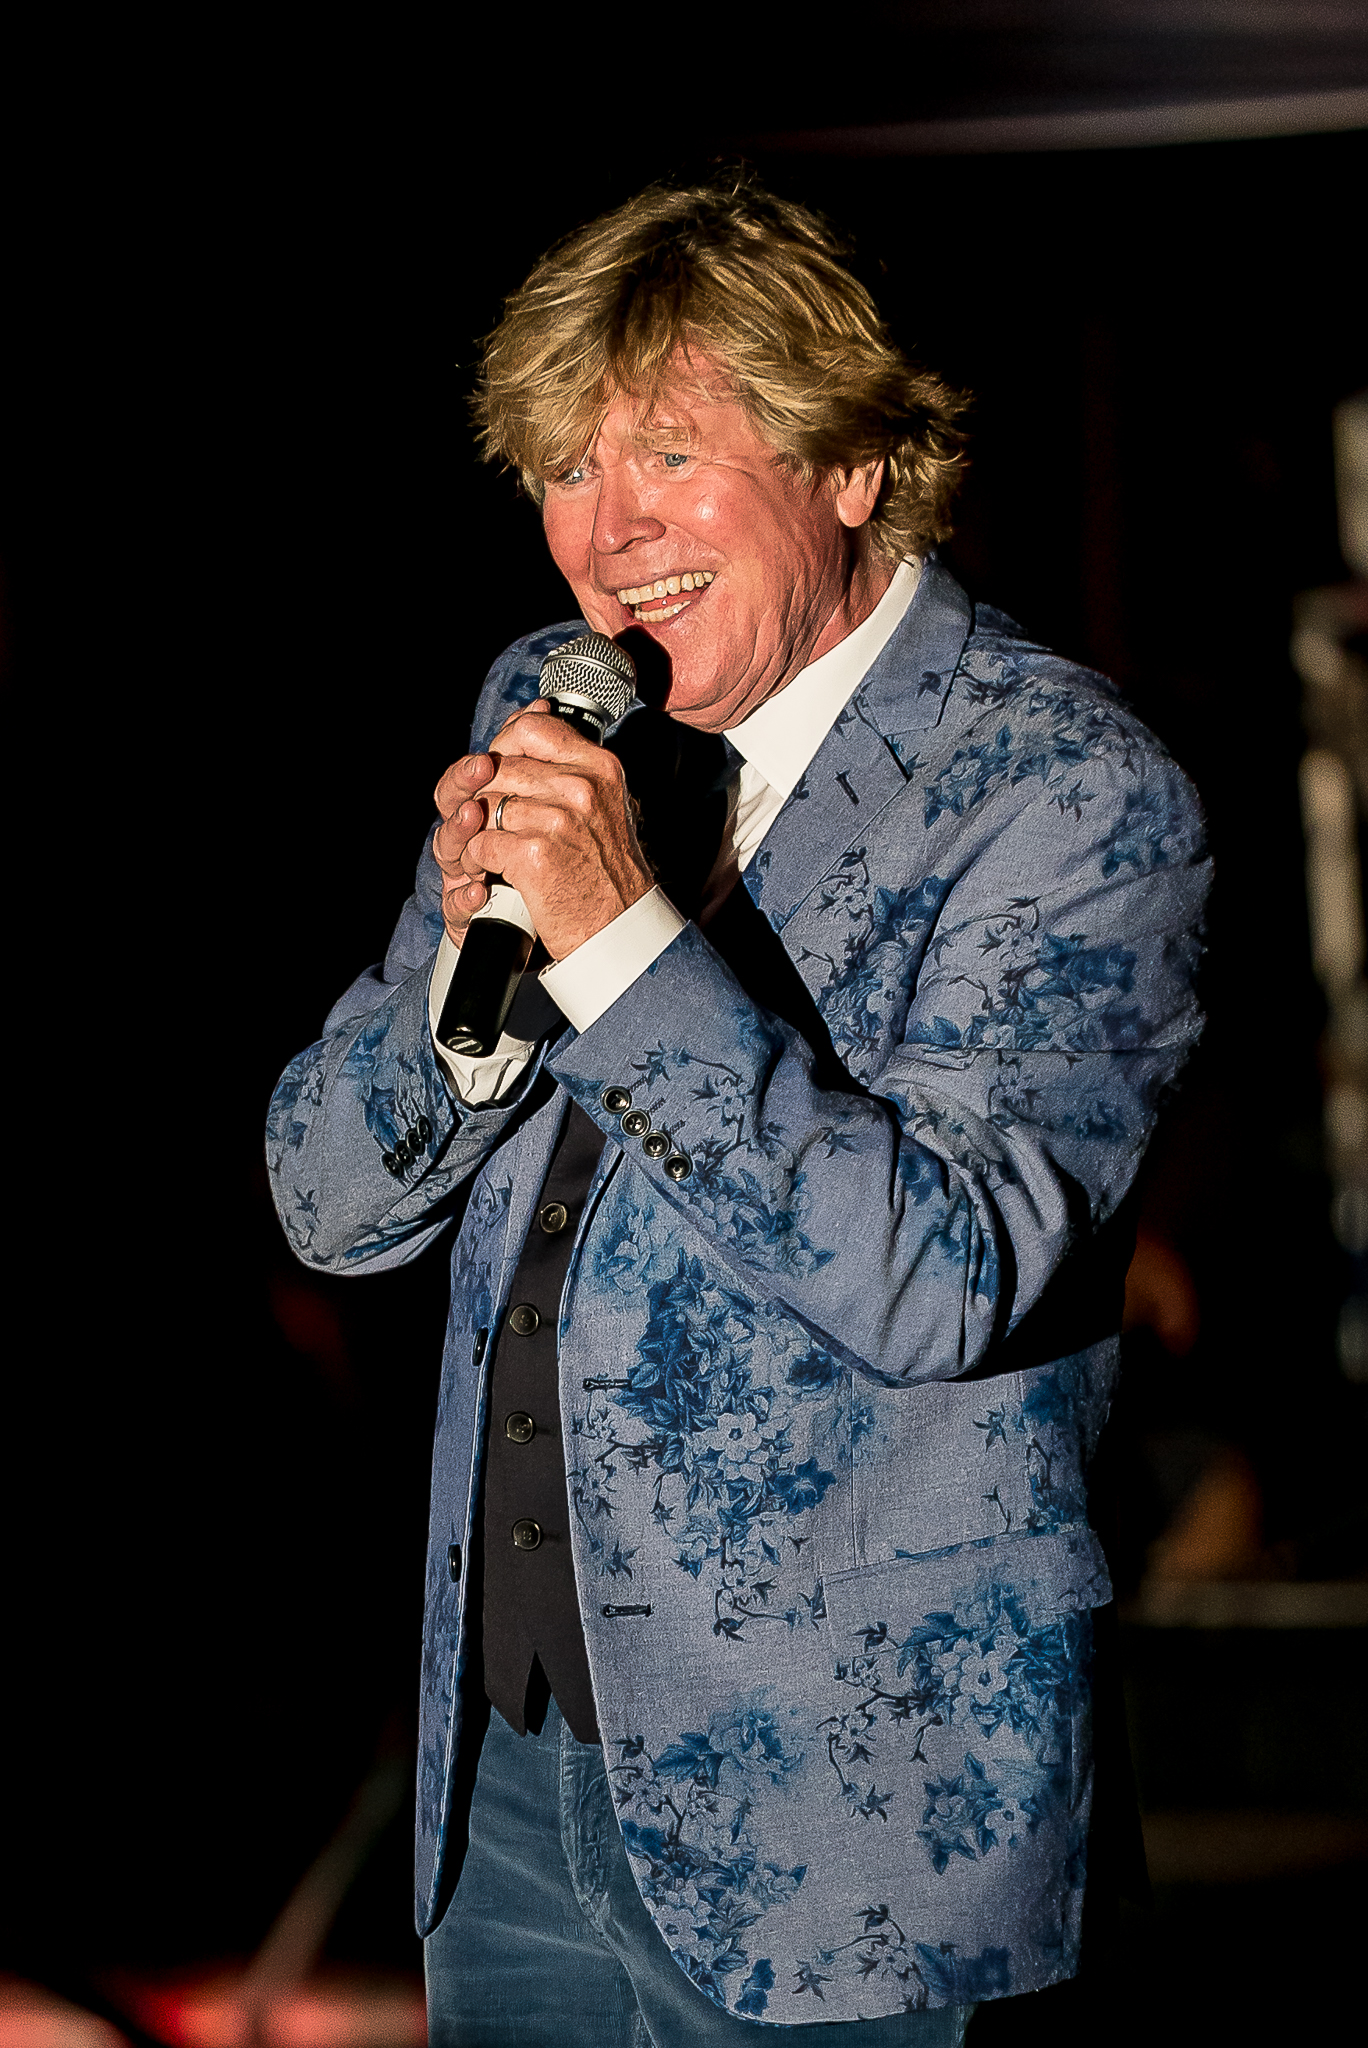 Concert Recap and Photos Peter Noone at the Misquamicut DriveIn (July